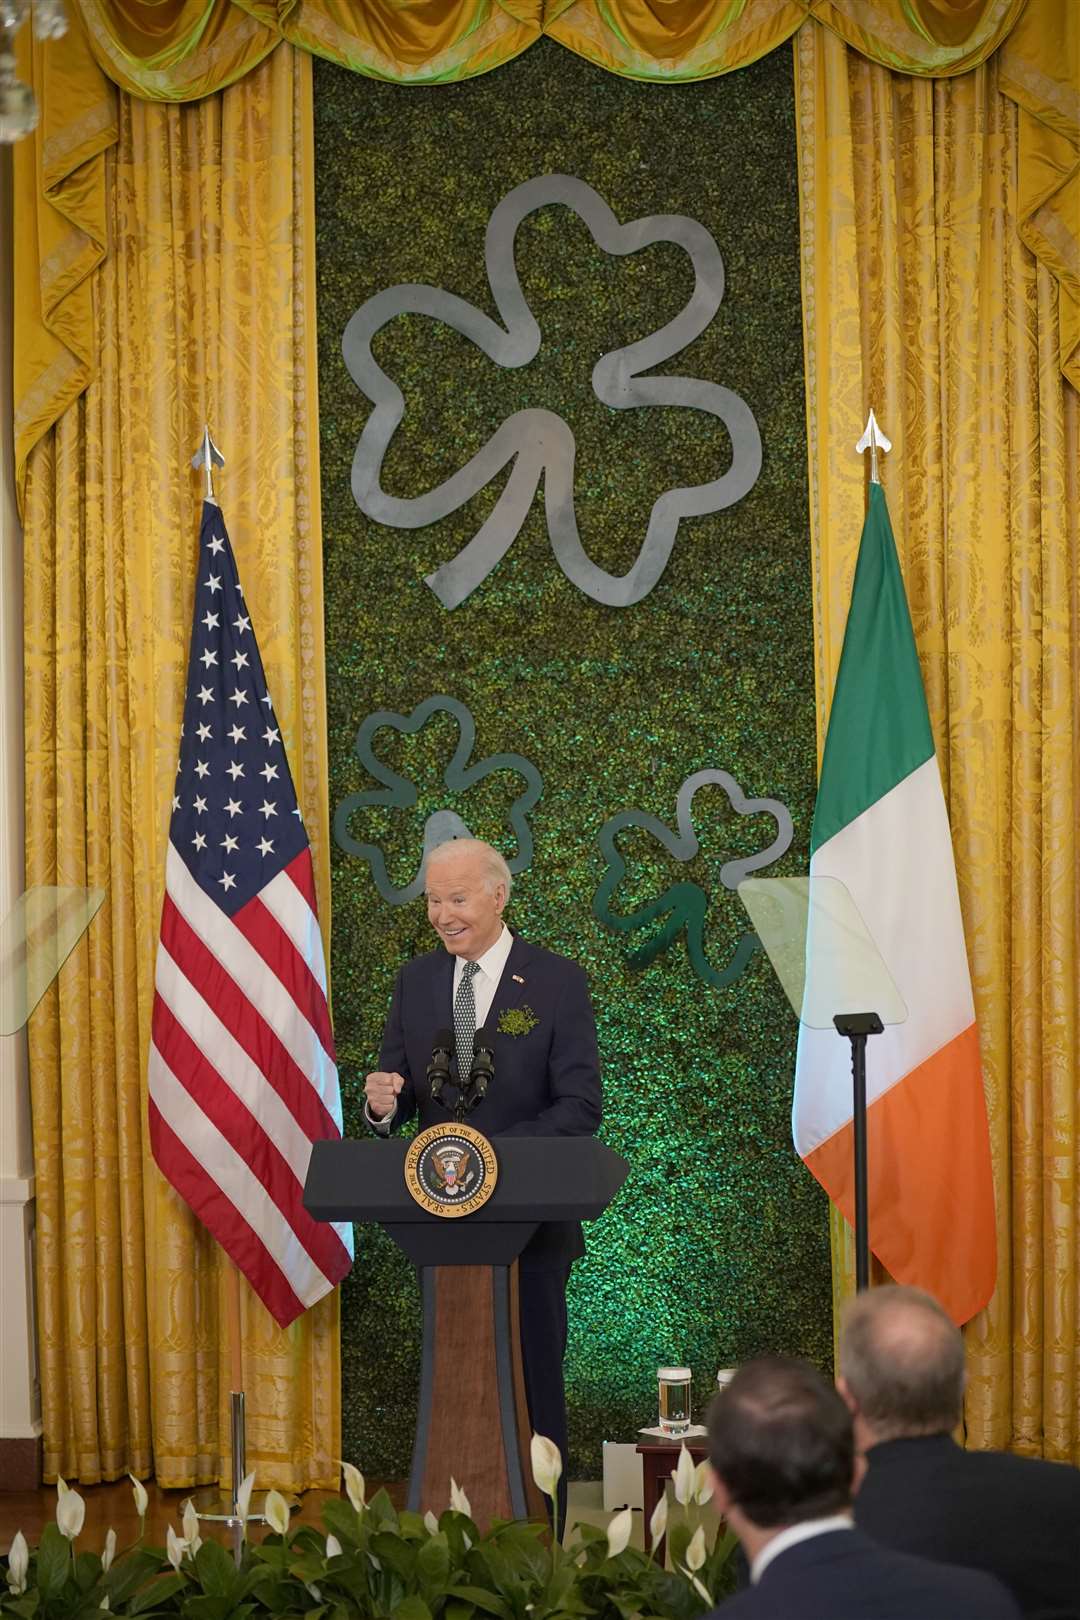 US President Joe Biden speaking during the St Patrick’s Day brunch with Catholic leaders in the East Room of the White House (Niall Carson/PA)